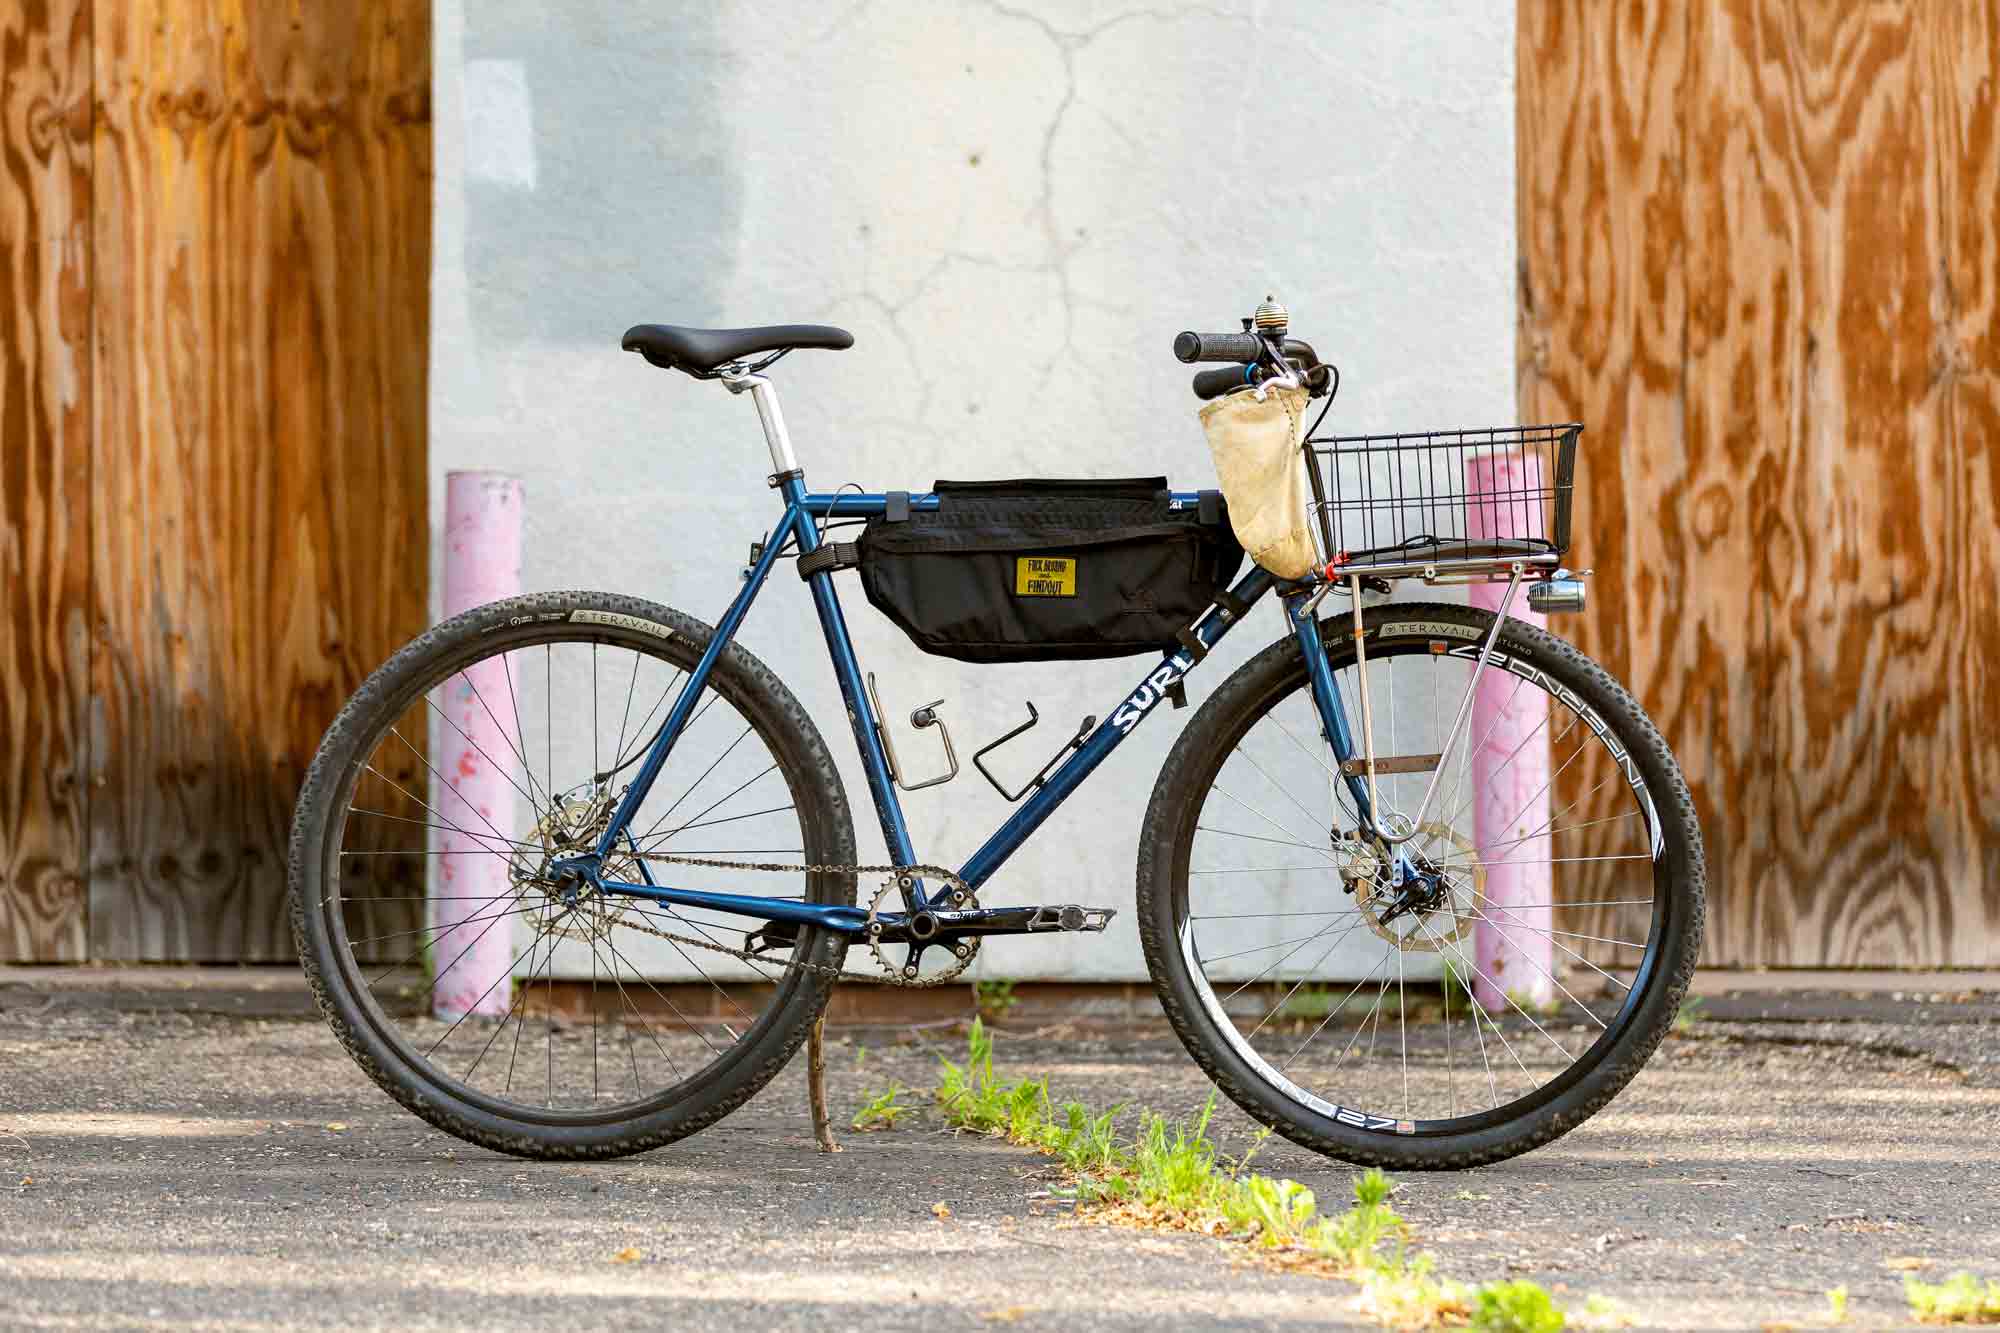 Make It Your Own - Surly Straggle Rat custom bike build using blue Surly Straggle frameset, single speed with front rack/ basket